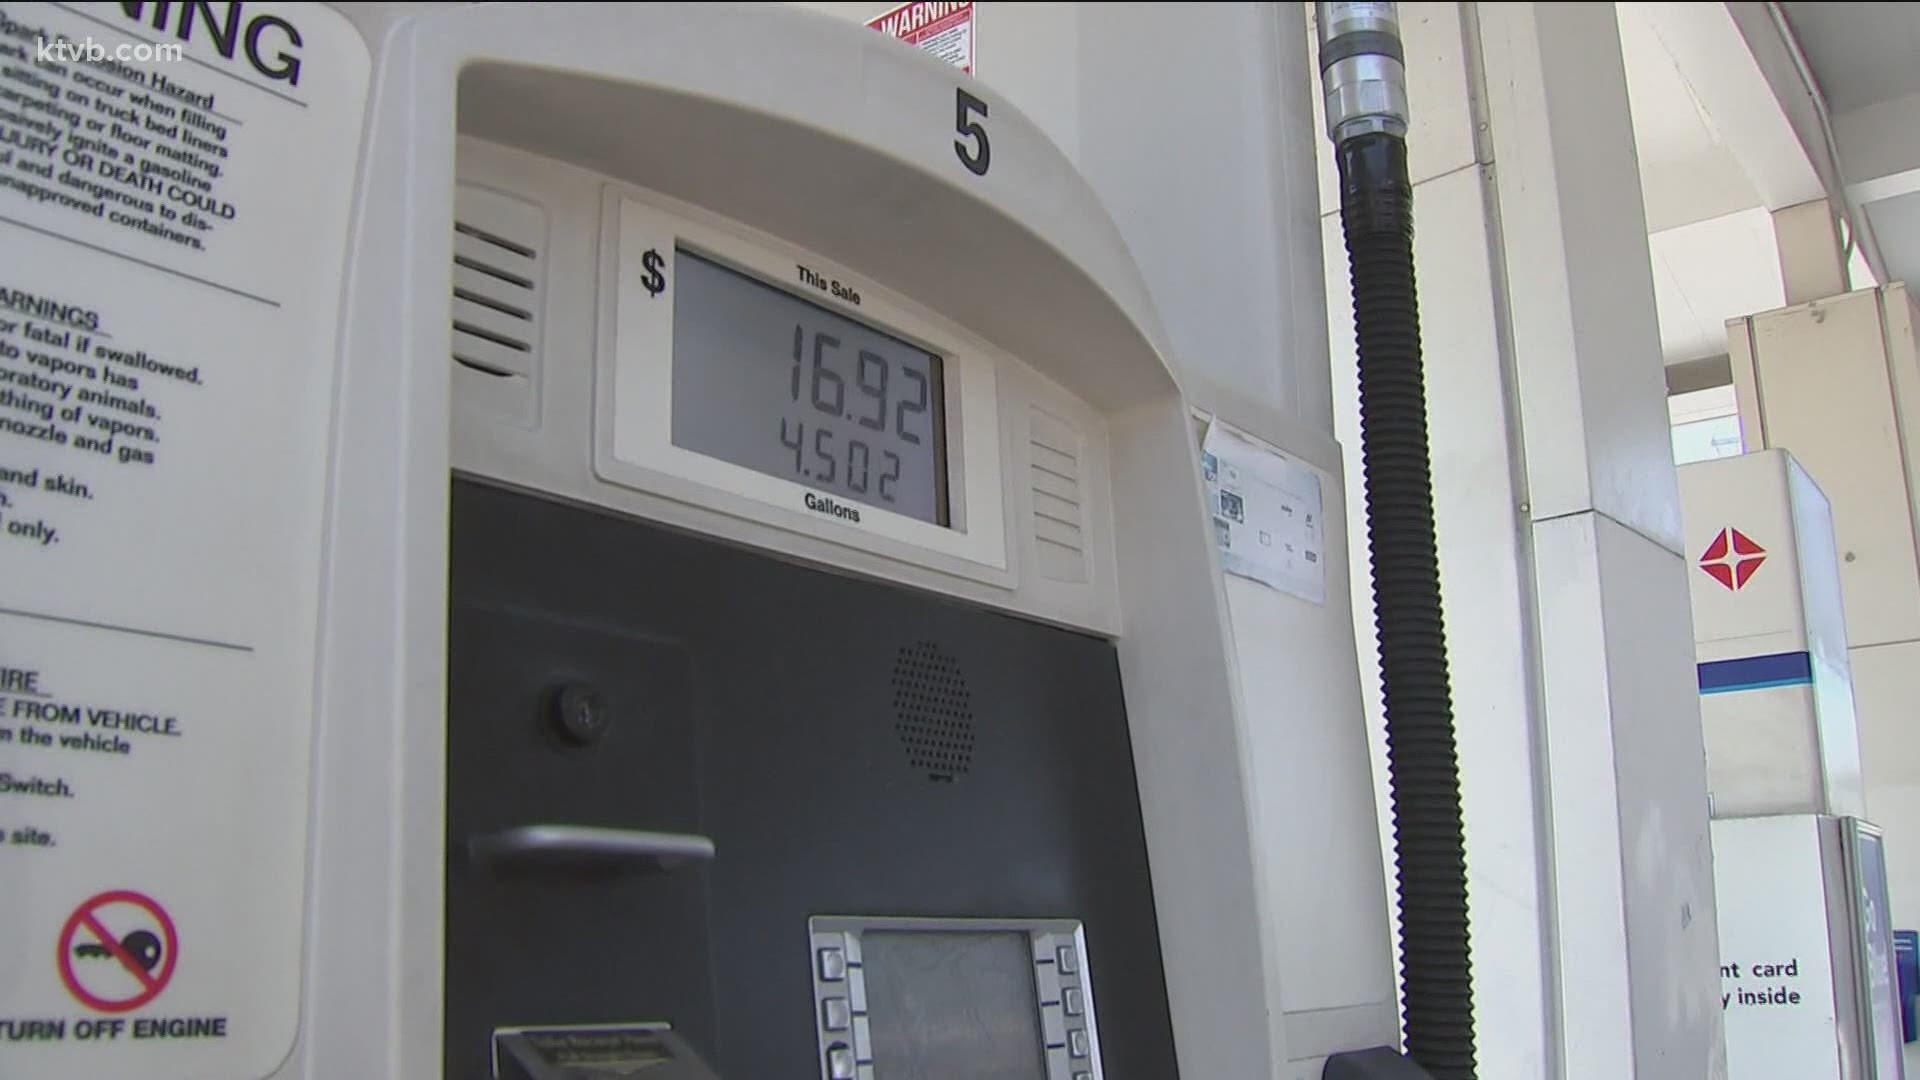 AAA Idaho says the price at the pump is 23 cents higher than the national average.